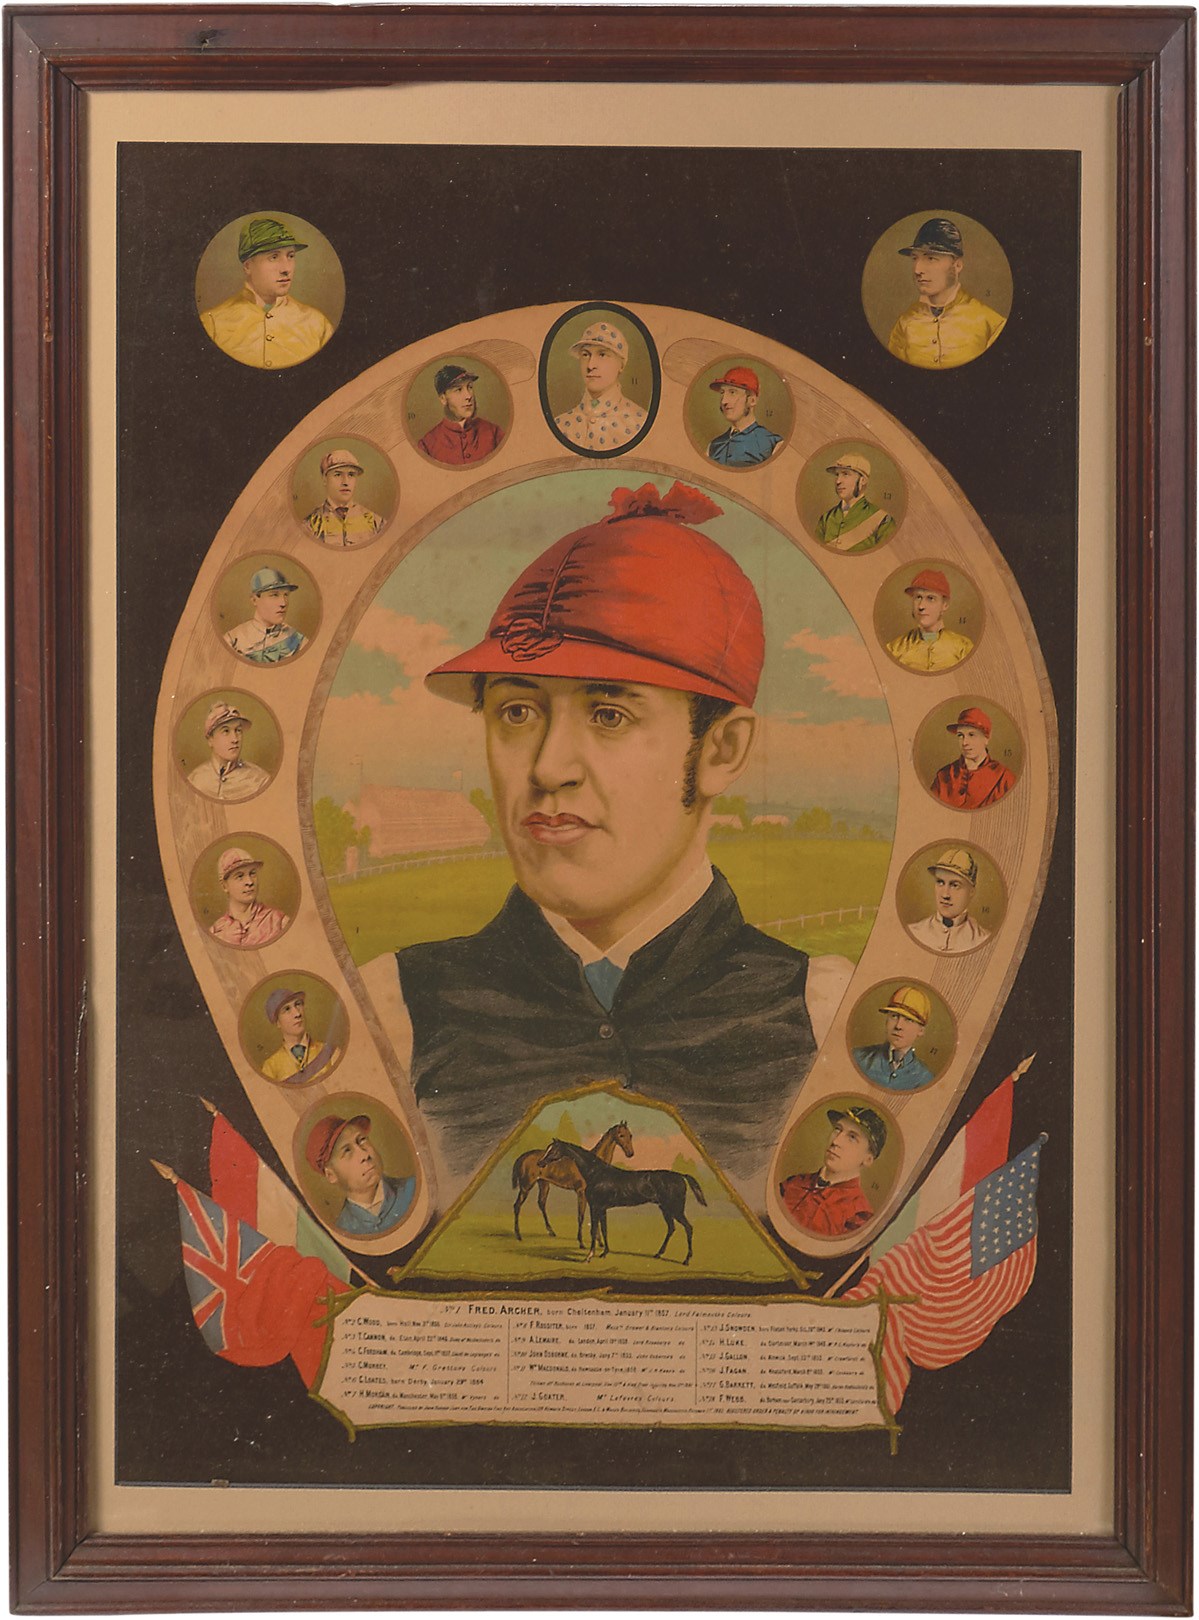 - 1882 Fred Archer & World's Greatest Jockeys Huge Lithograph - Only One Known